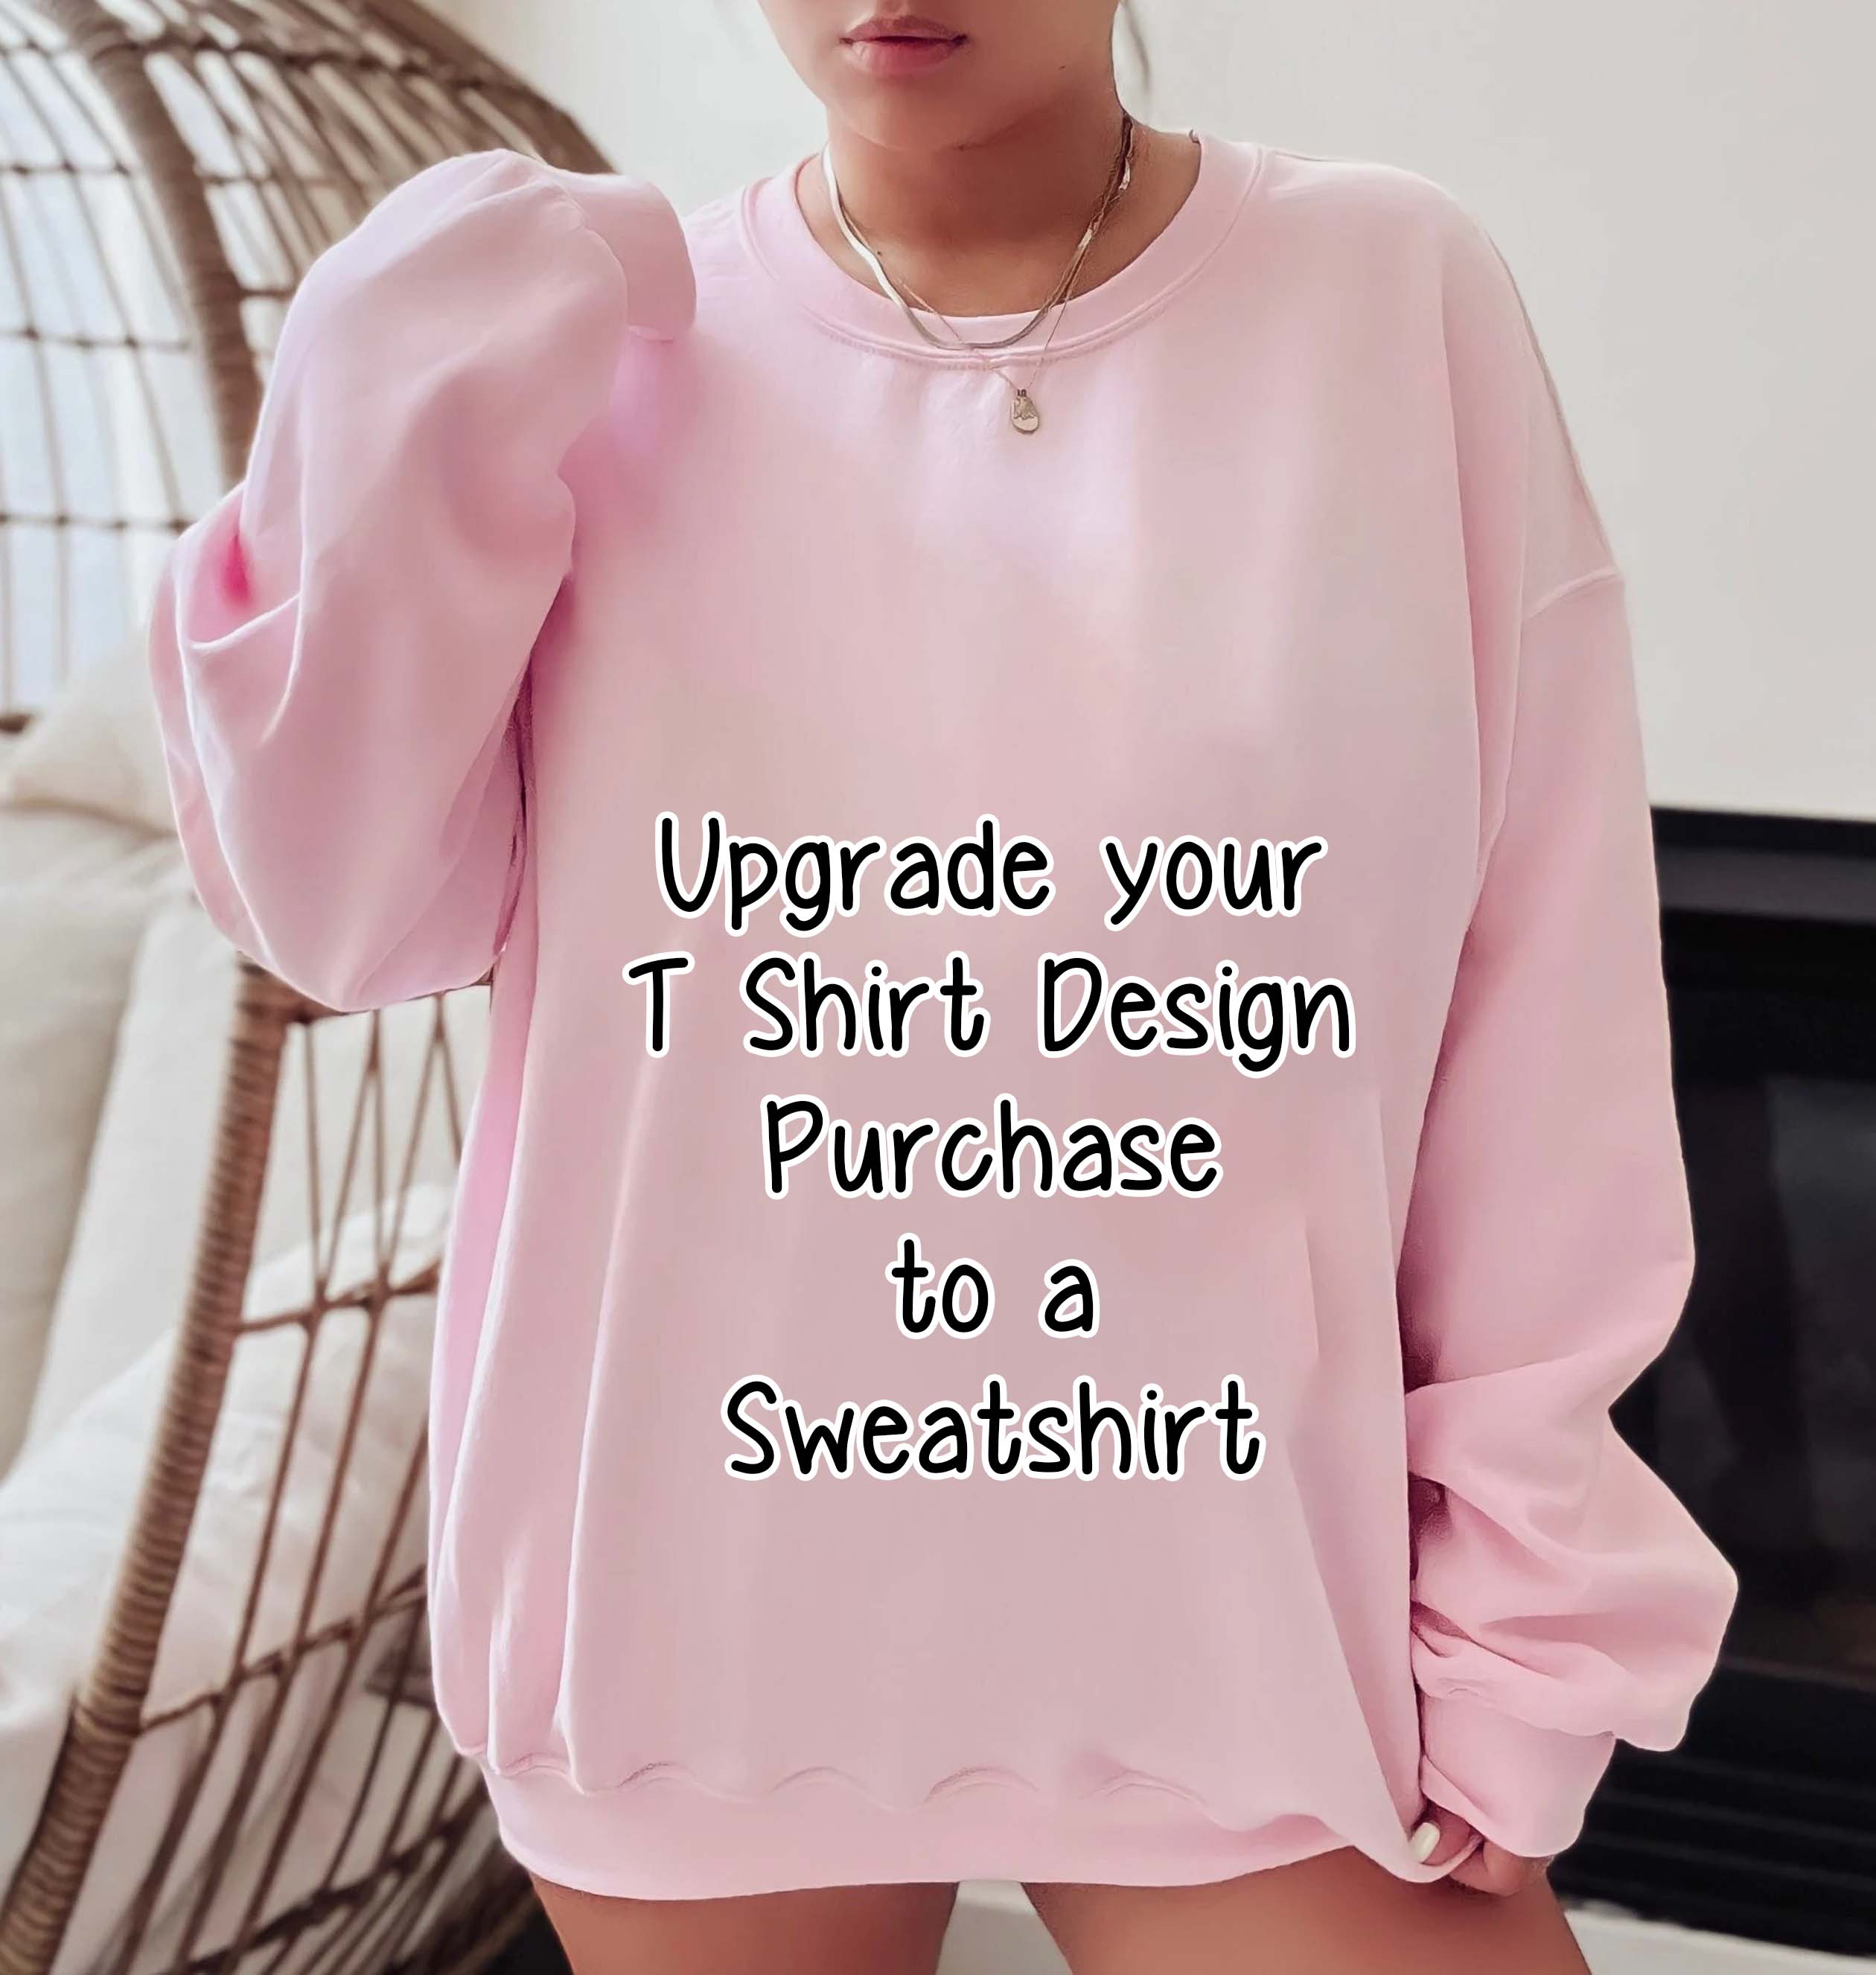 Upgrade any T-Shirt to a Unisex Sweatshirt in our Shop, Sweatshirt Order Add On